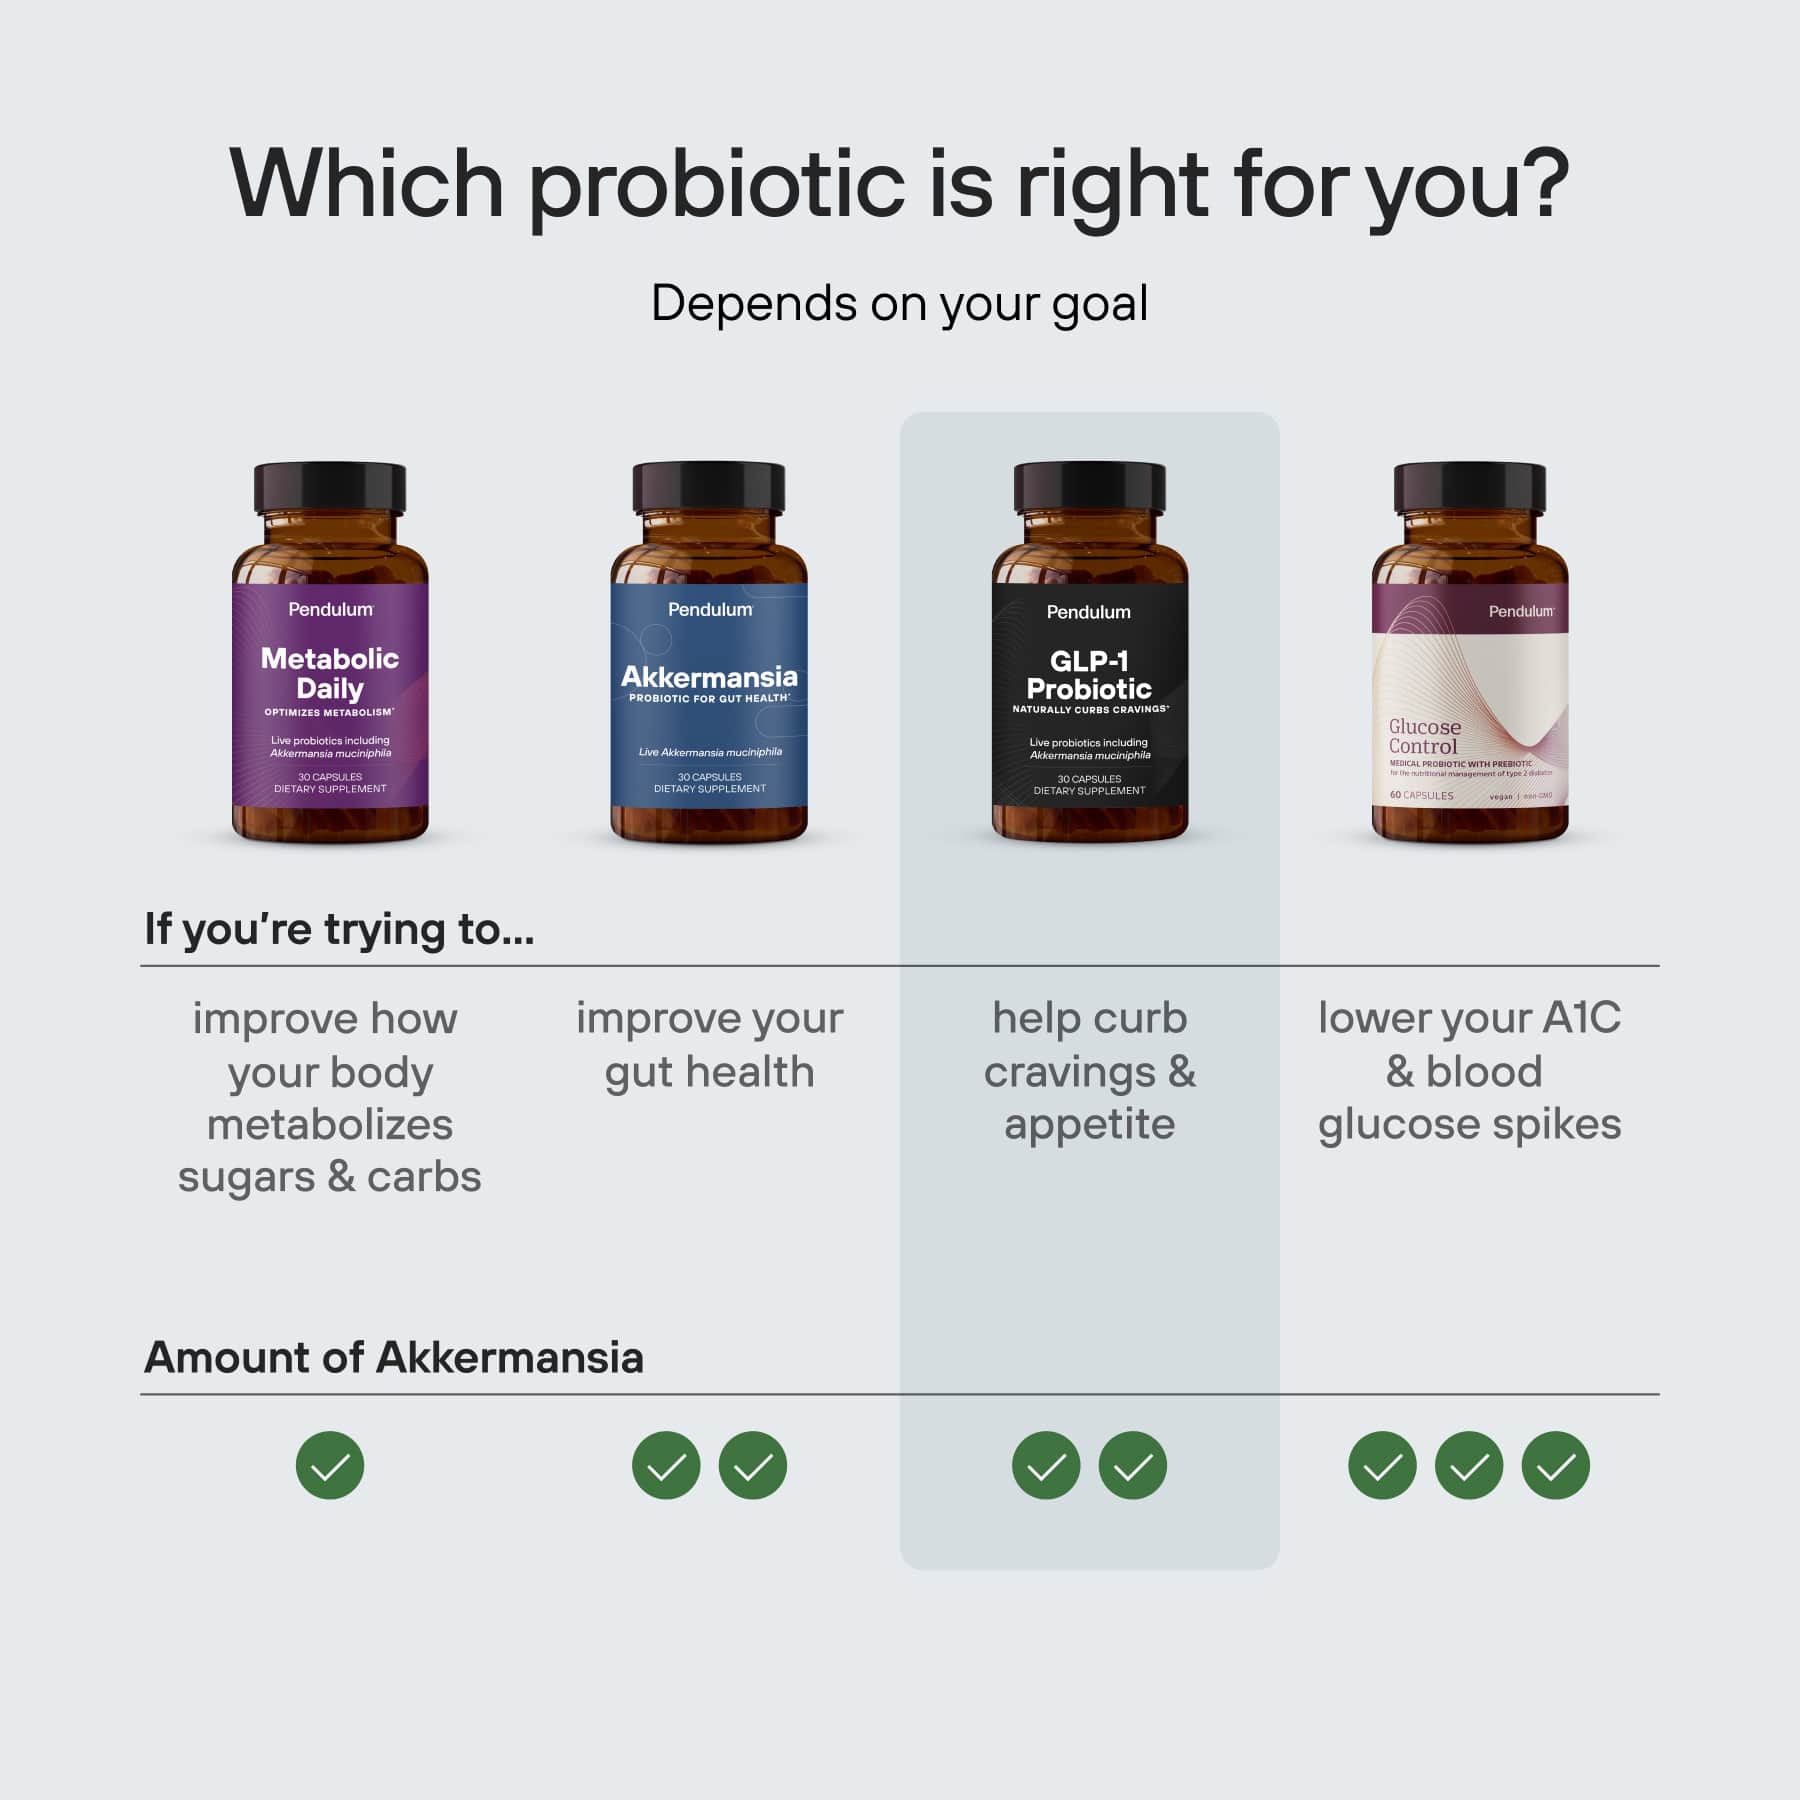 Which probiotic is right for you? Depends on your goal. If you're trying to improve how your body metabolizes sugars and carbs, Metabolic Daily is your probiotic. If you're trying to improve your gut health, Akkermansia is your probiotic. If trying to help curb cravings and appetite, GLP-1 Probiotic is right for you. If trying to lower your A1C & blood glucose spikes, Glucose Control is your probiotic.